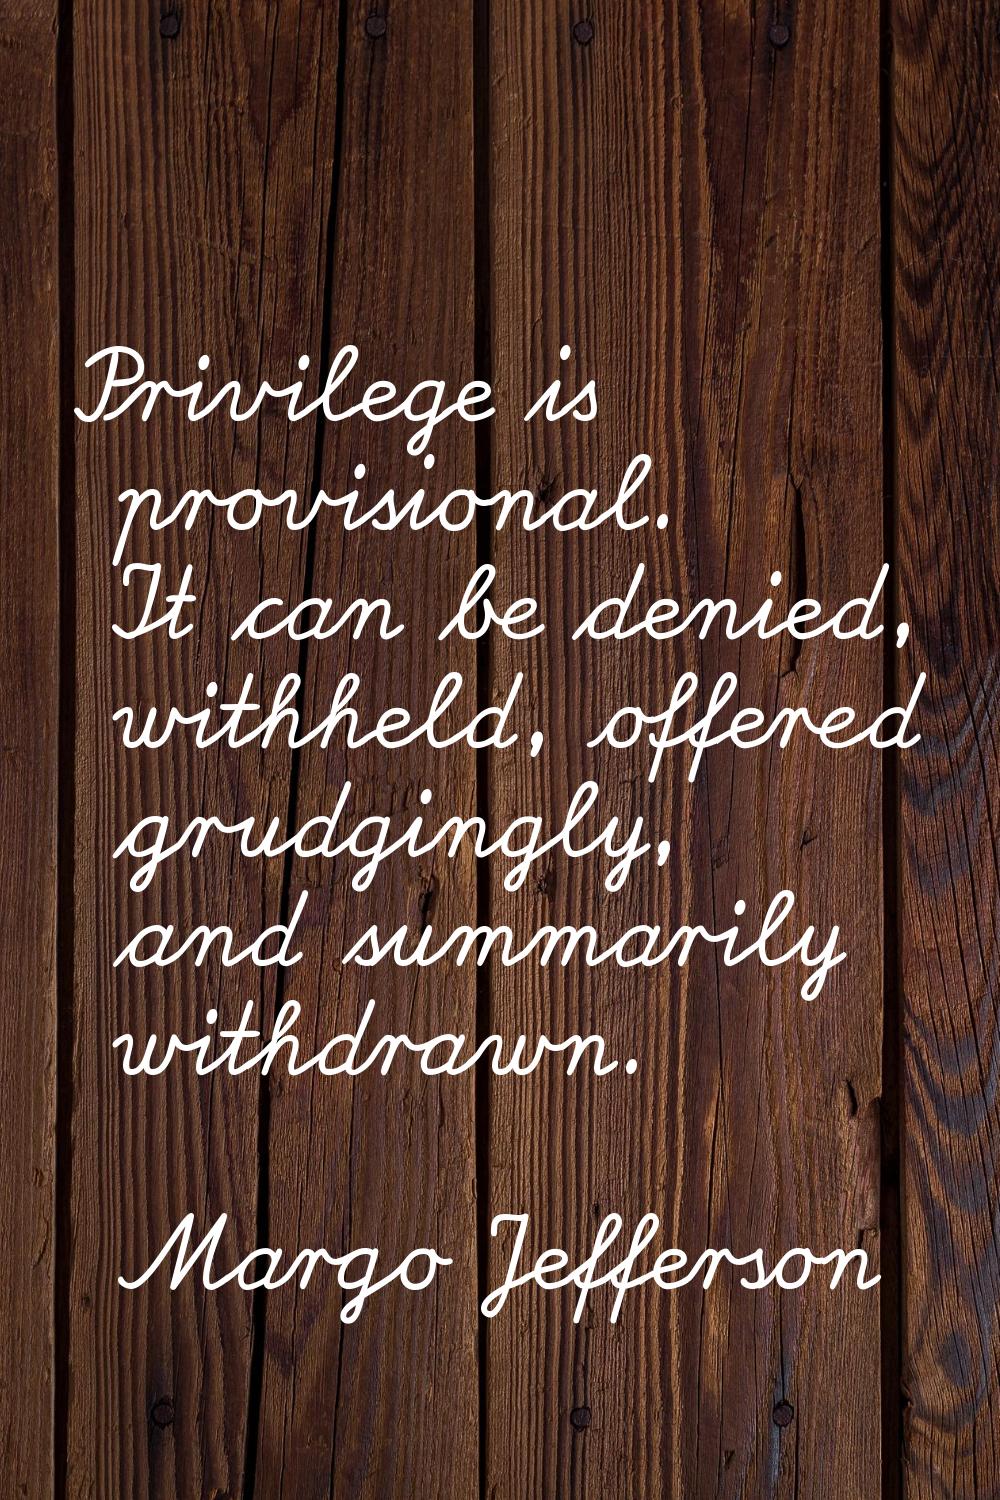 Privilege is provisional. It can be denied, withheld, offered grudgingly, and summarily withdrawn.